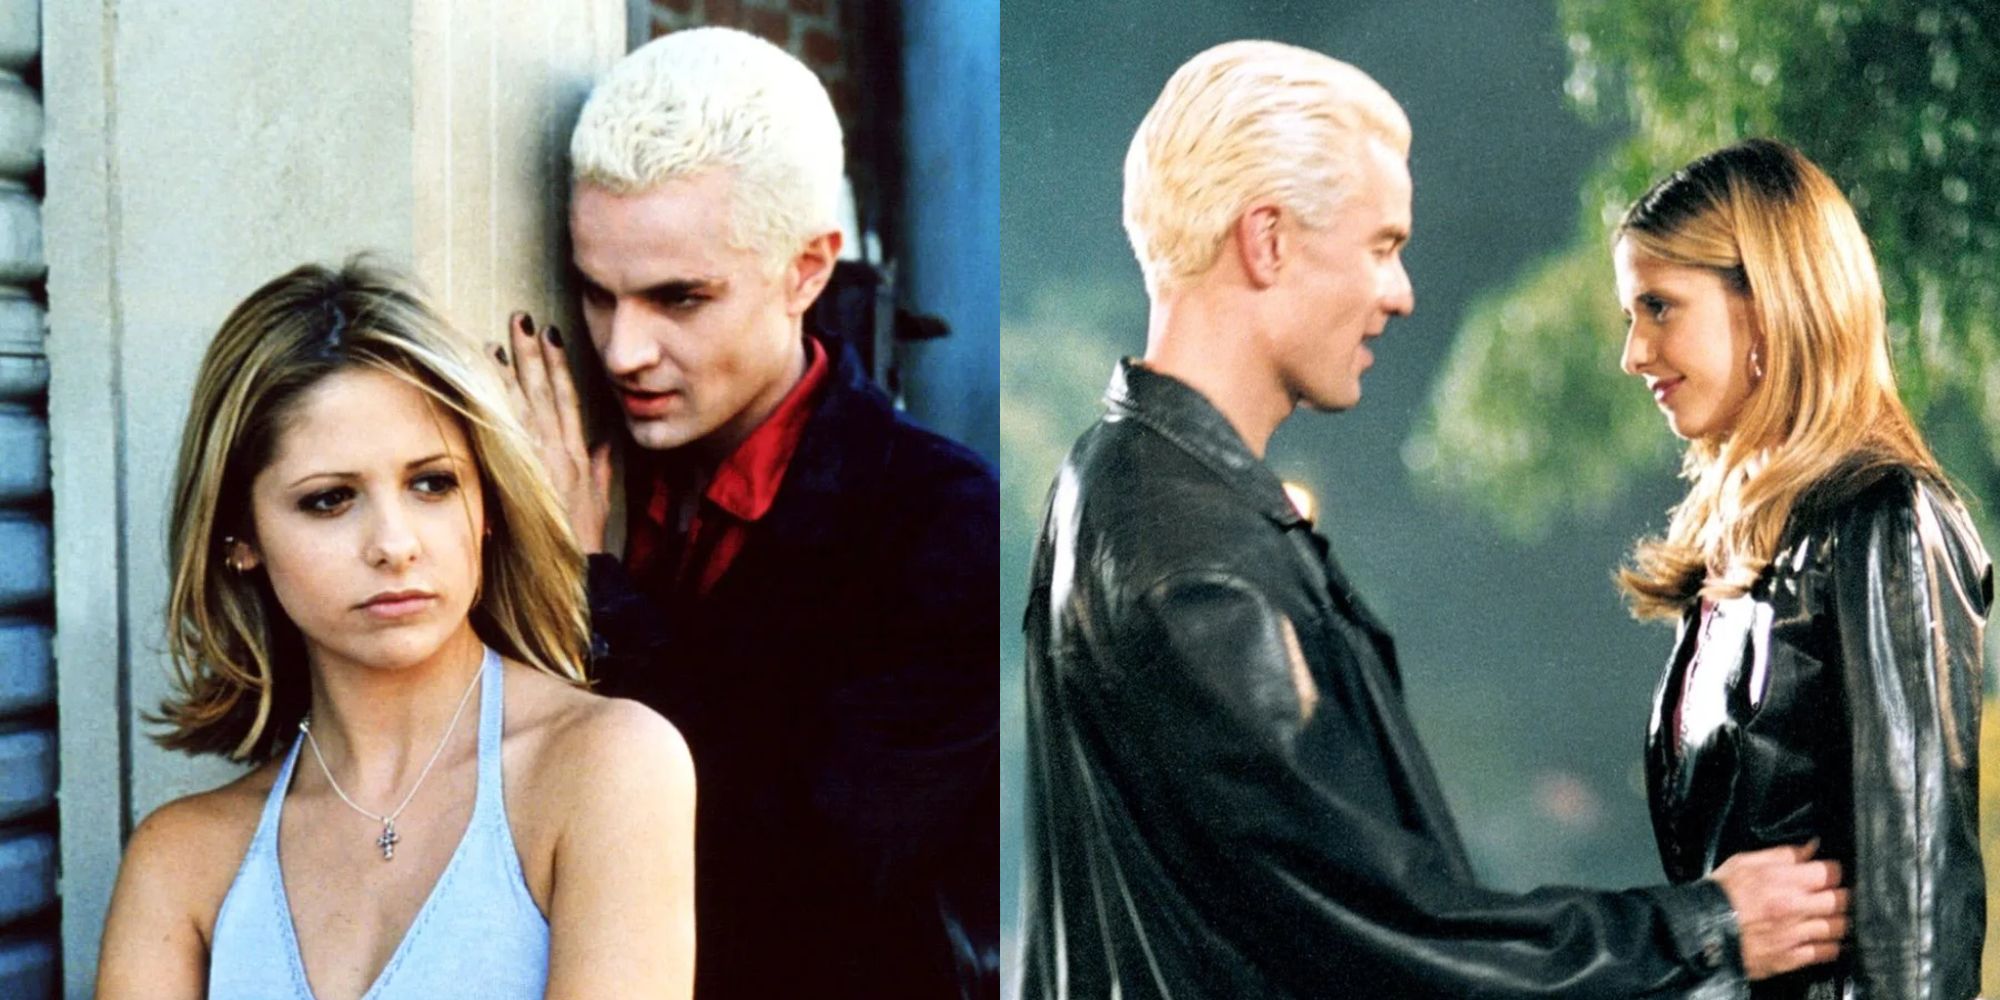 Buffy The Vampire Slayer: 10 Best Tweets About Spike And Buffy's Relationship